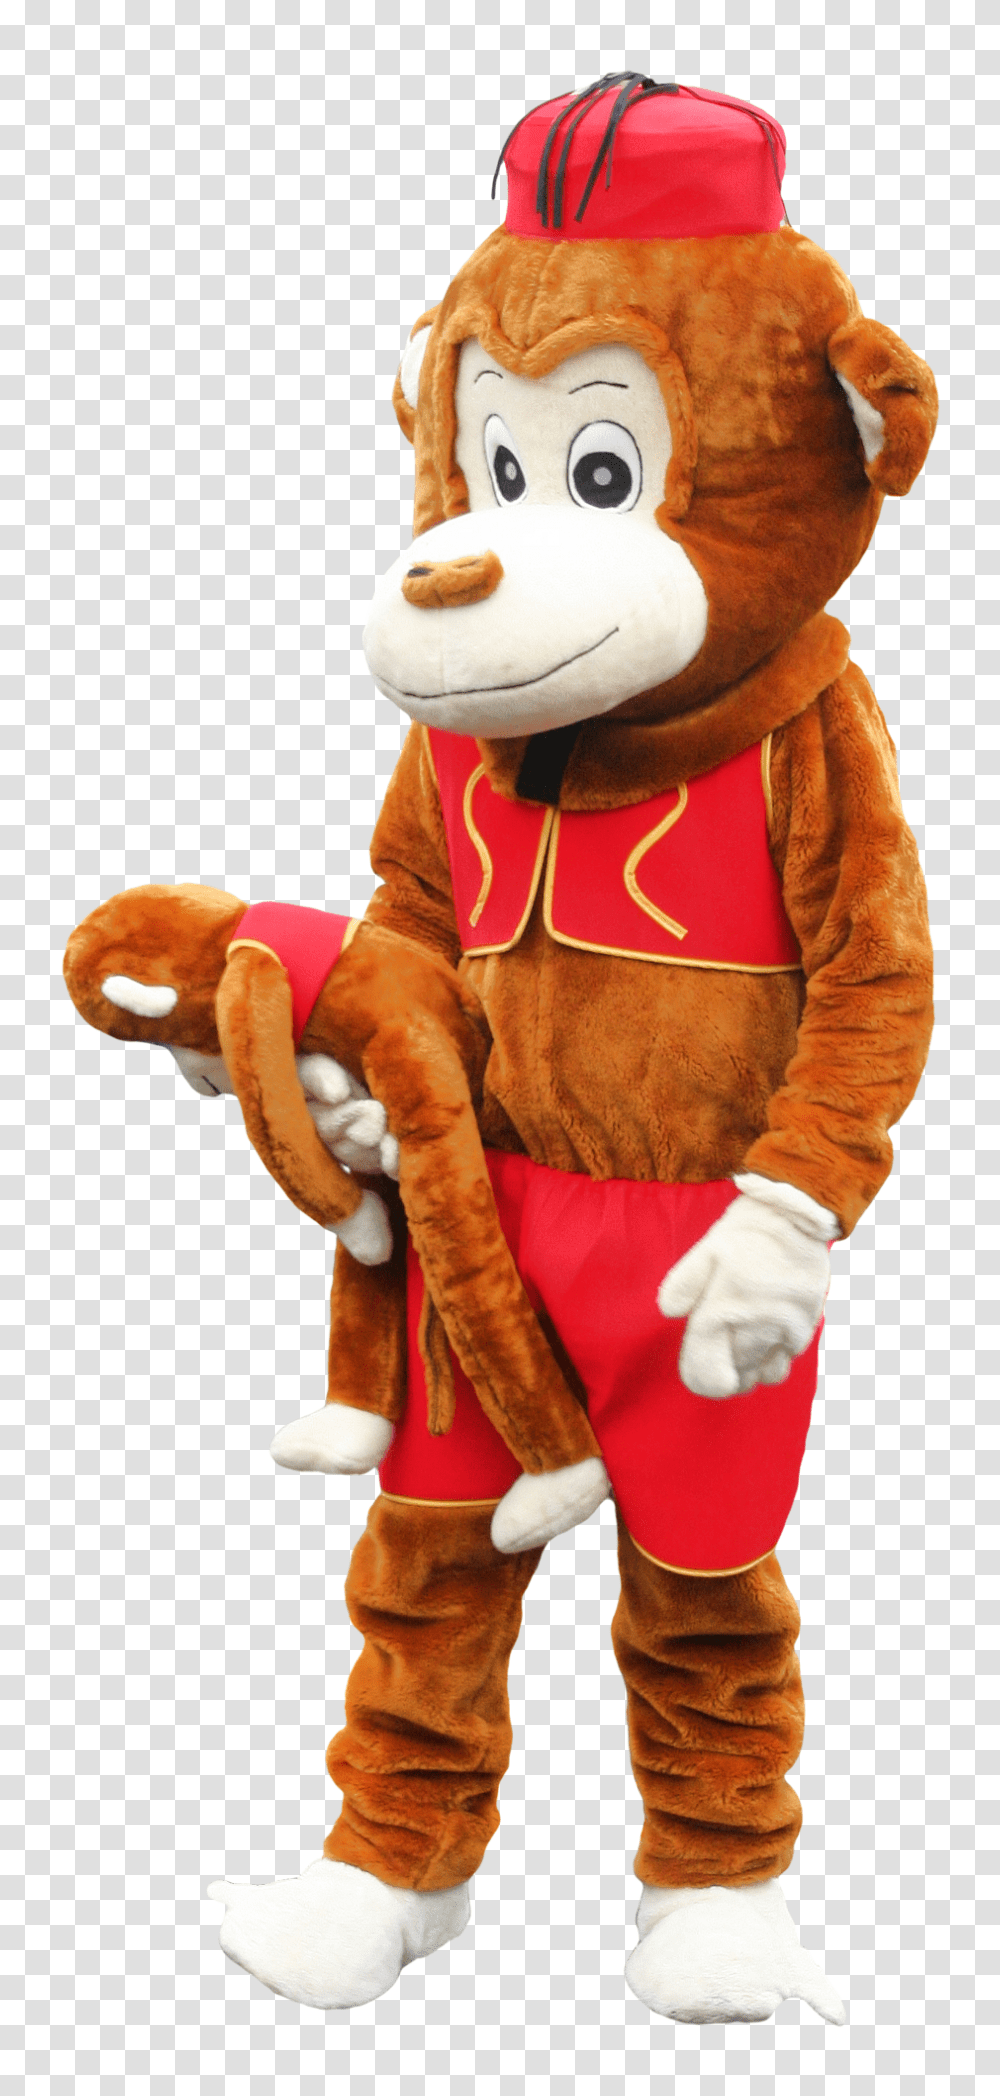 Monkey Toy Image, Mascot, Cracker, Bread, Food Transparent Png